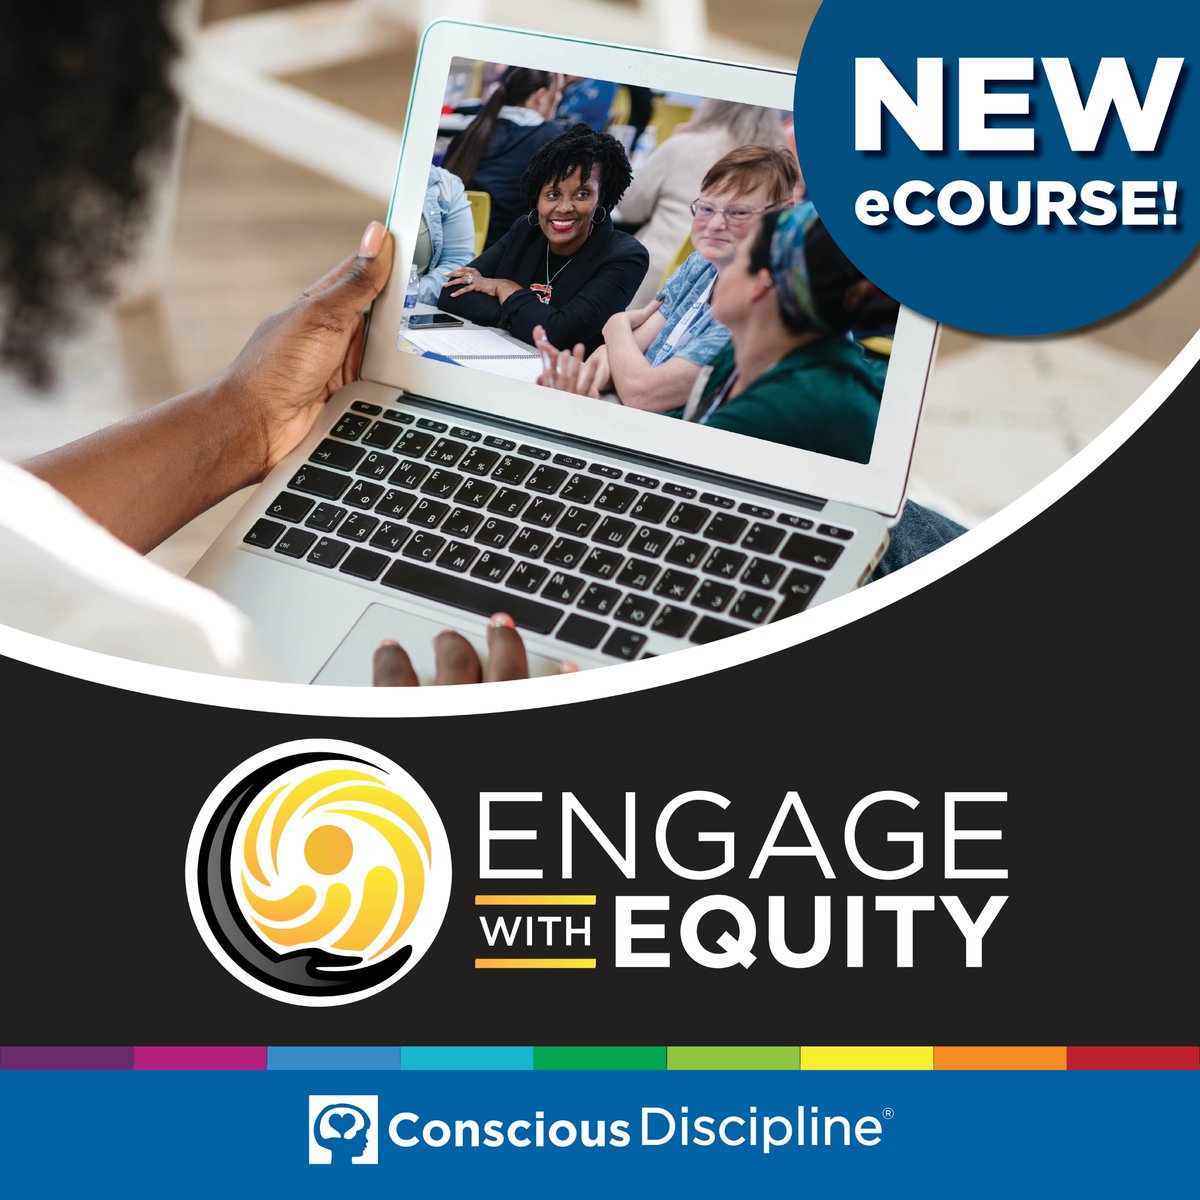 NEW eCOURSE NOW AVAILABLE: Engage with Equity! Join us in this 11-part series as we create meaningful and equitable change together. t.ly/WI8FU